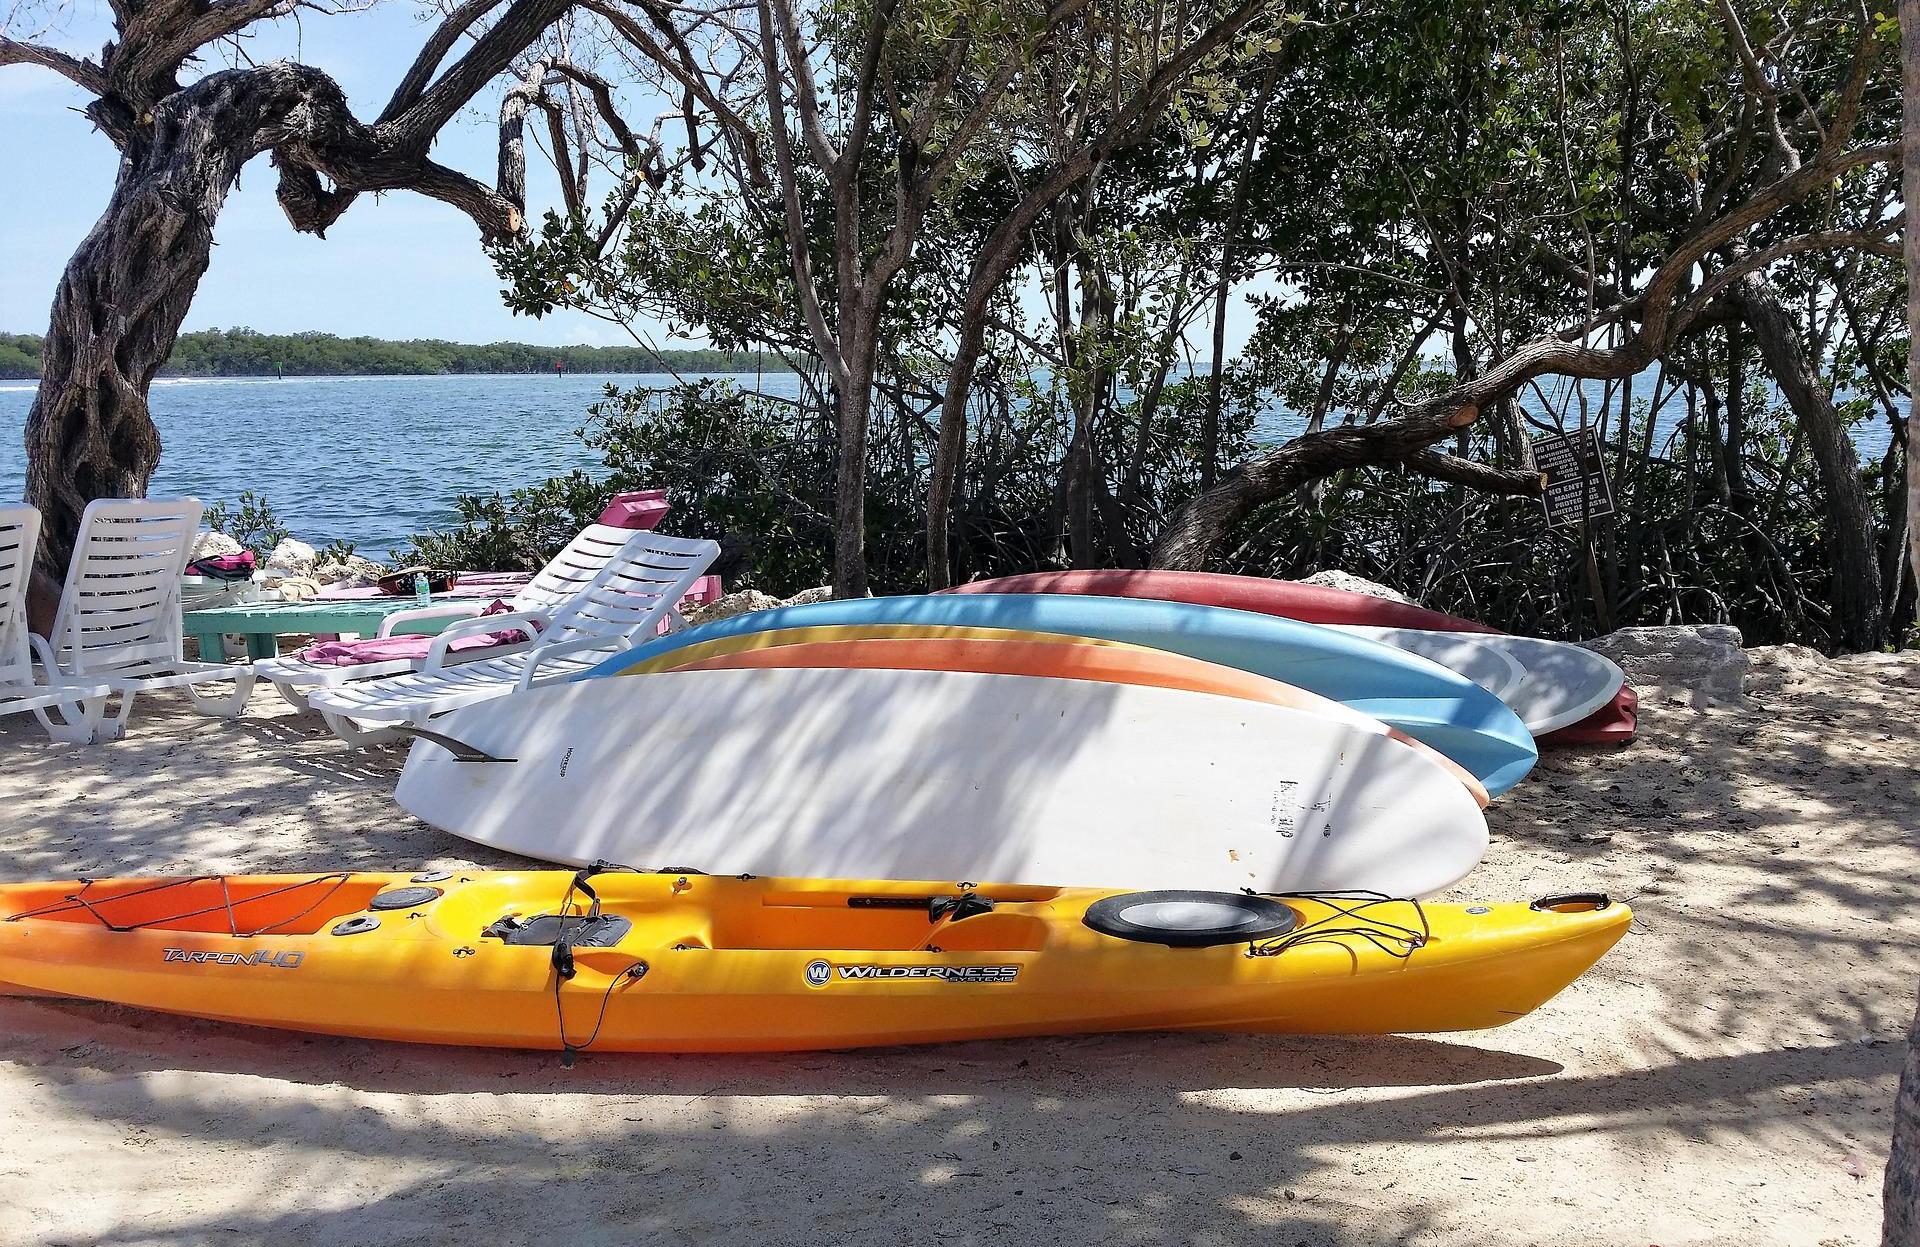 A yellow kayak and several paddleboards lie on the beach